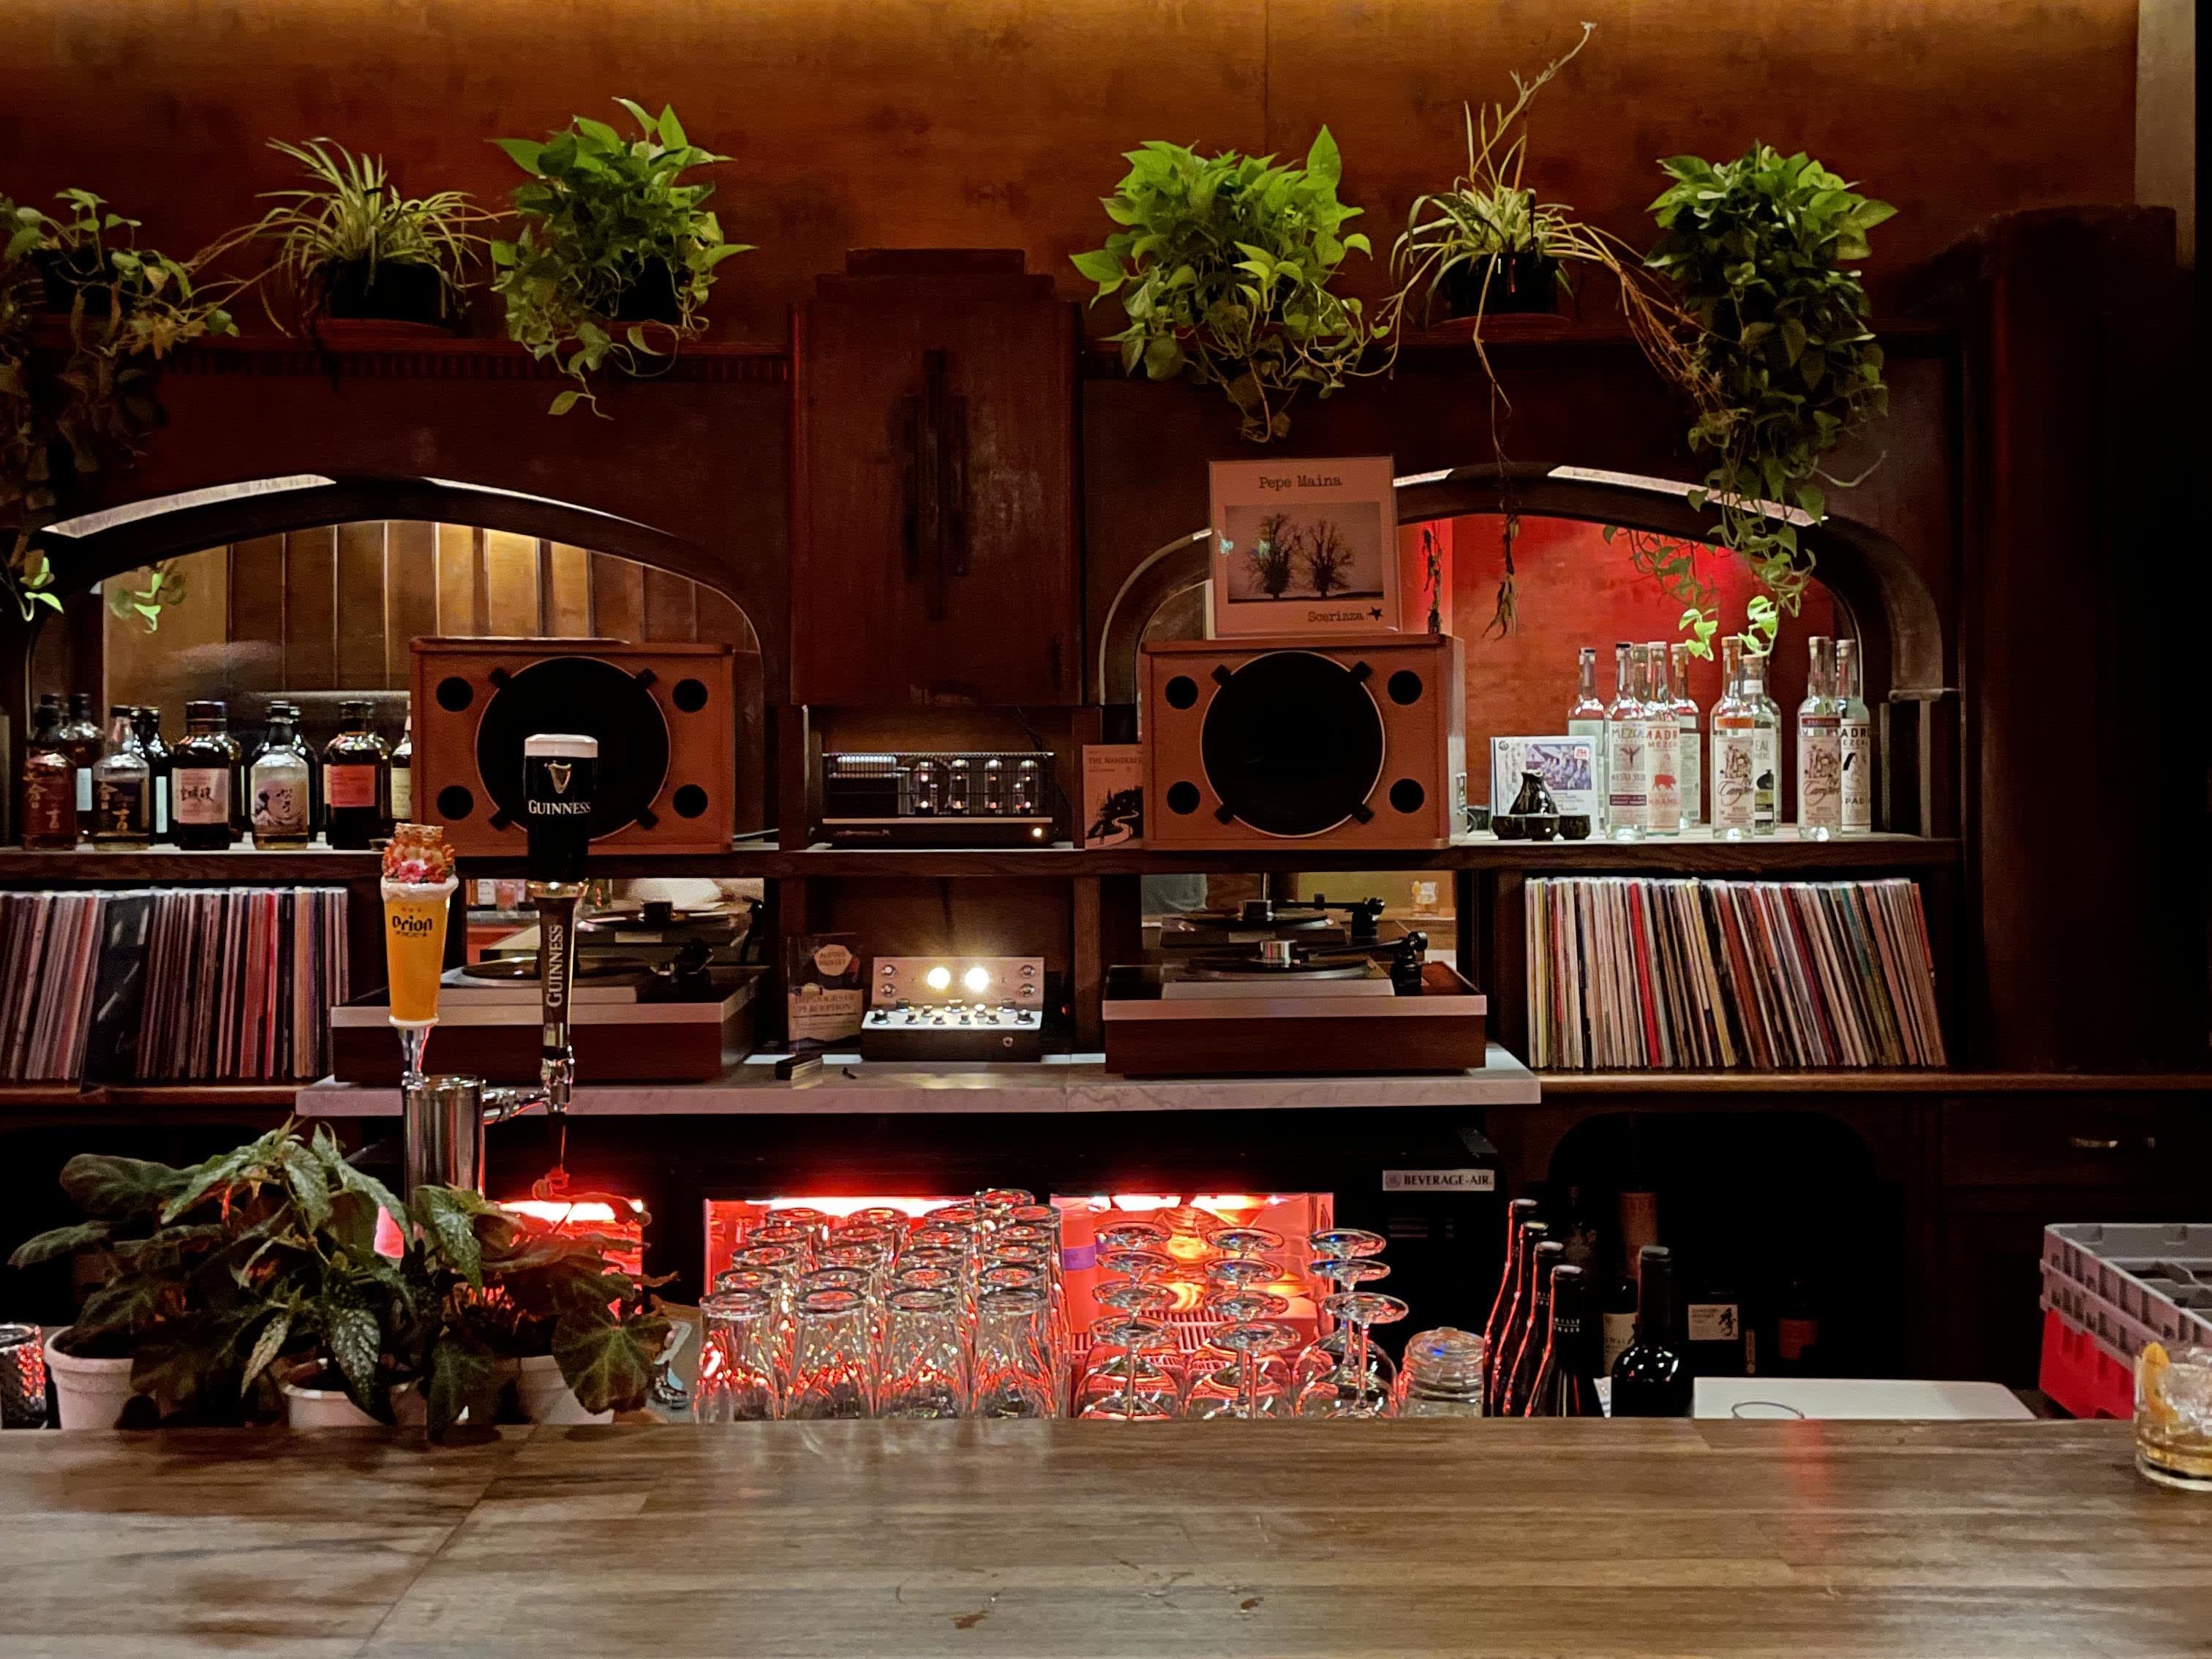 The 15 Best NYC Bars Where You Can Dance - New York - The Infatuation